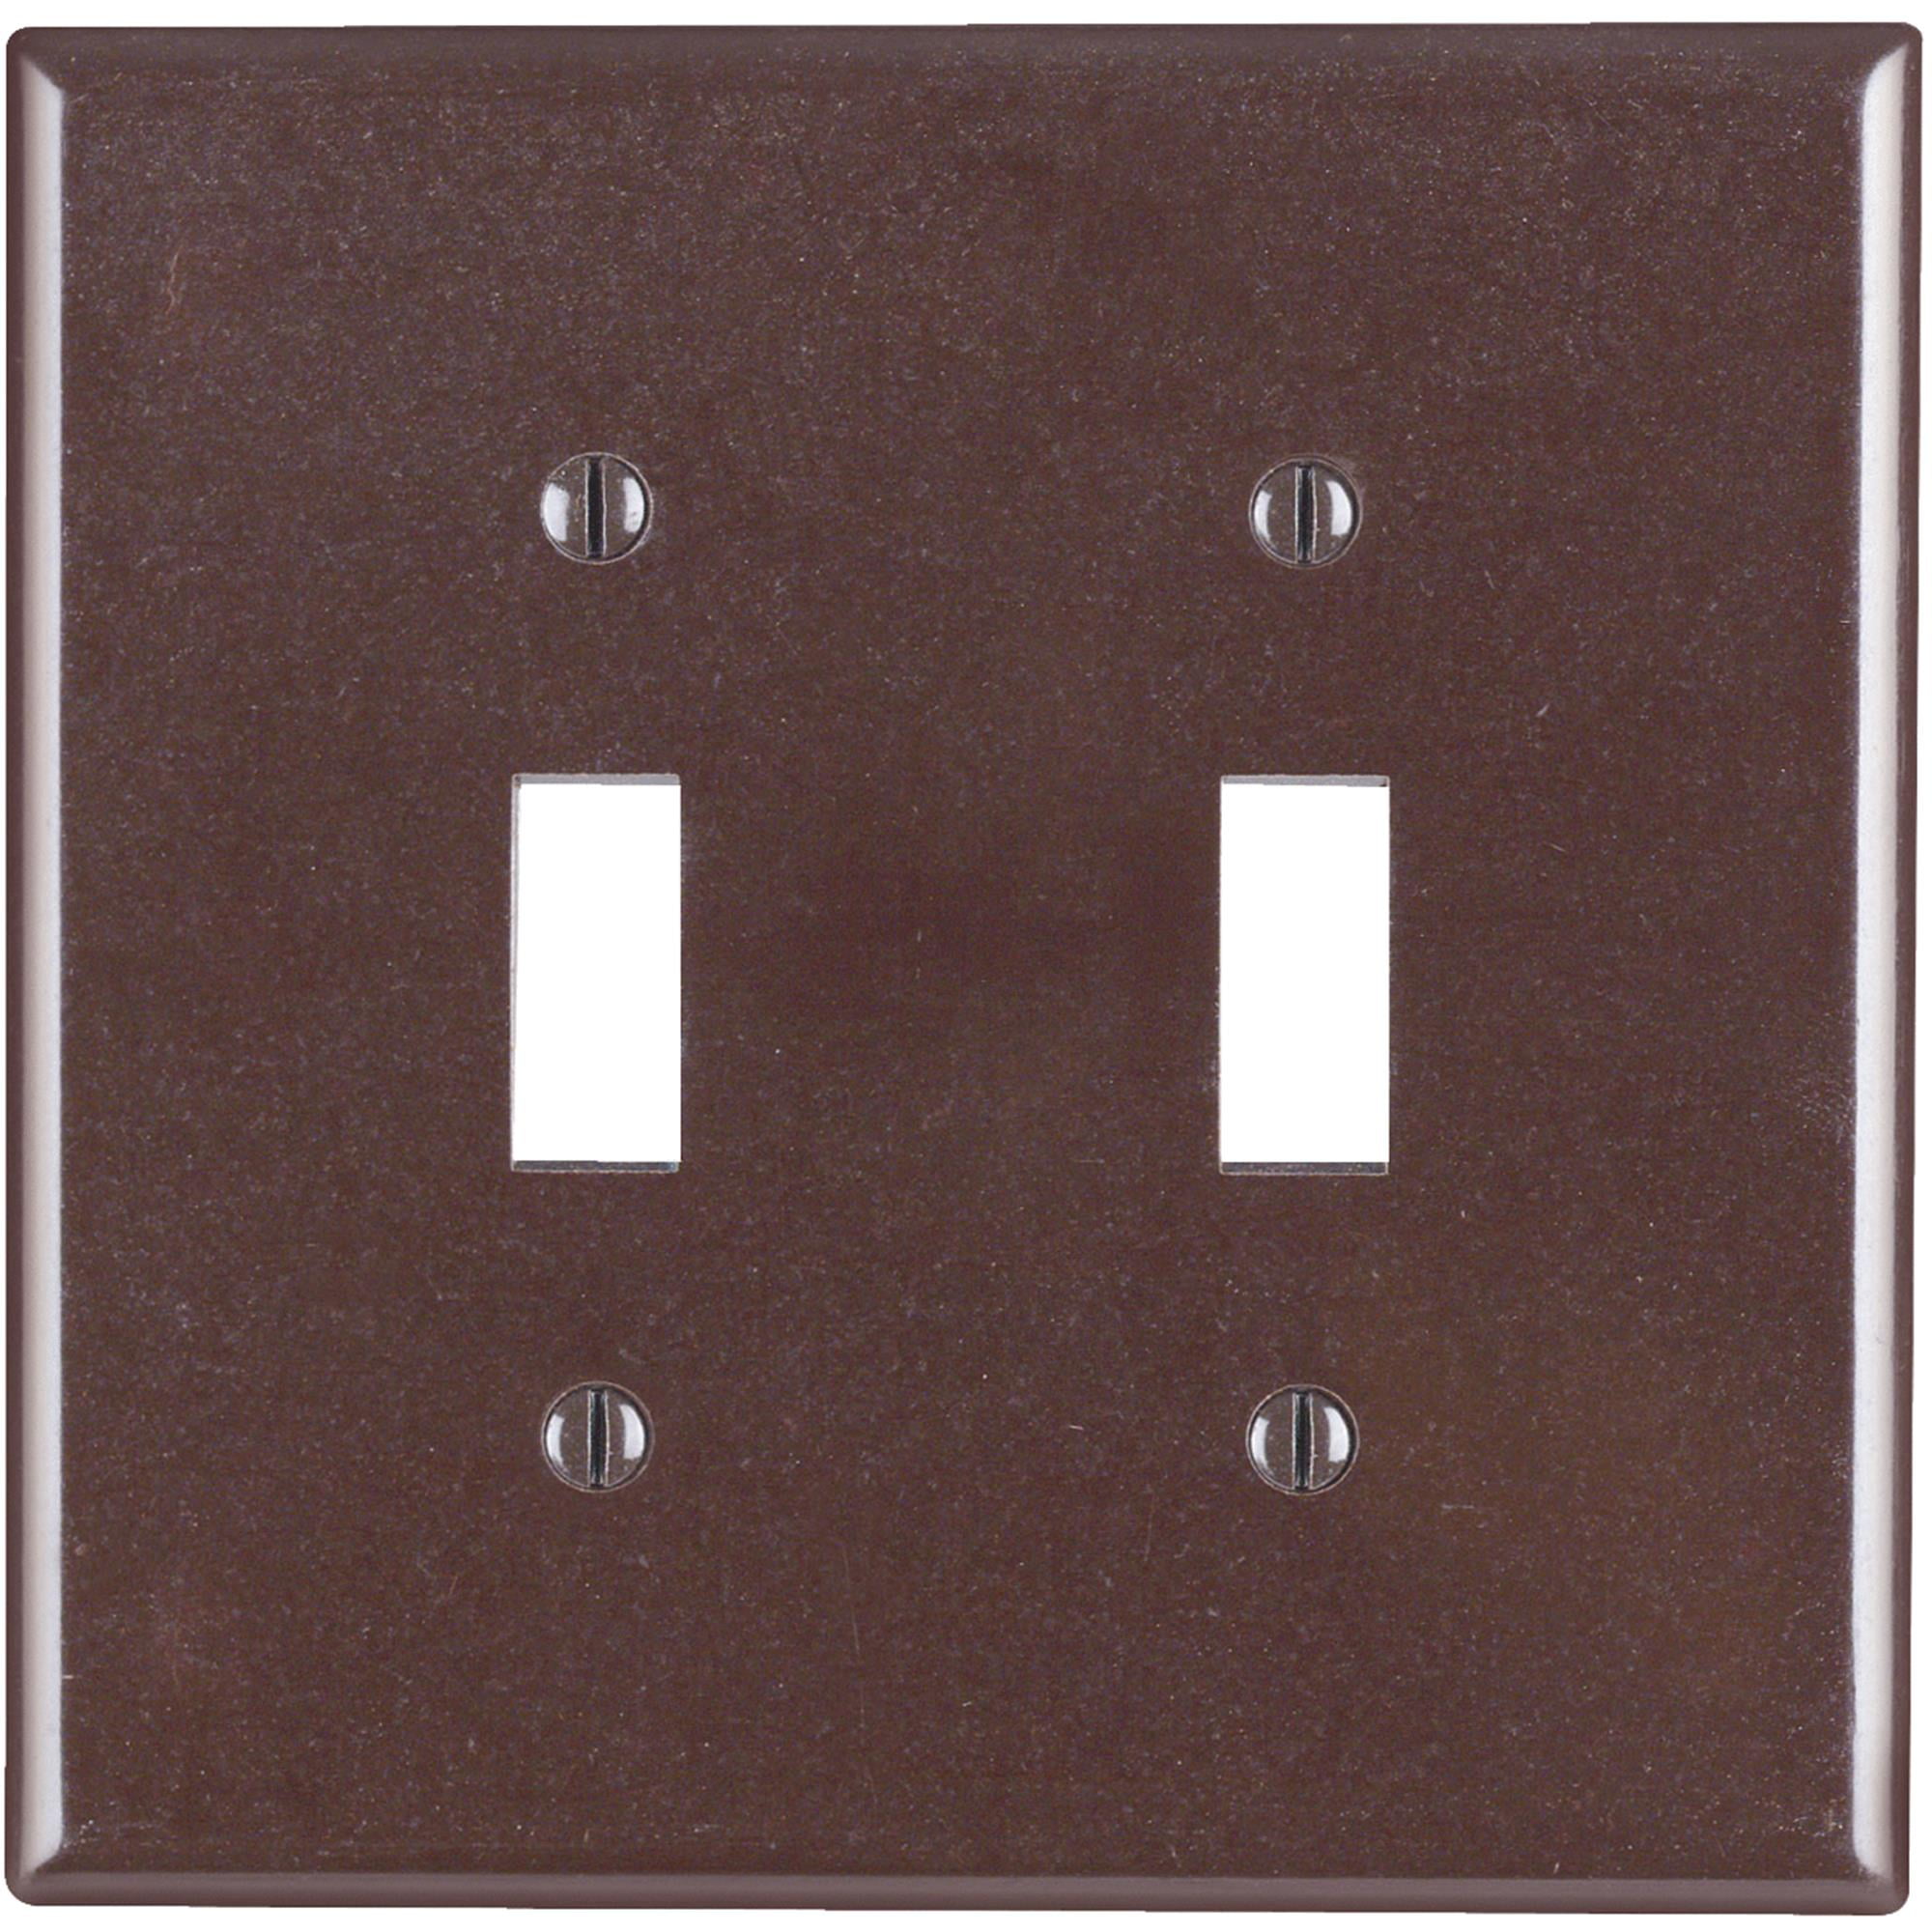 W10584-ESN Satin Nickel and Espresso Wood Insert Double Switch Cover Plate 